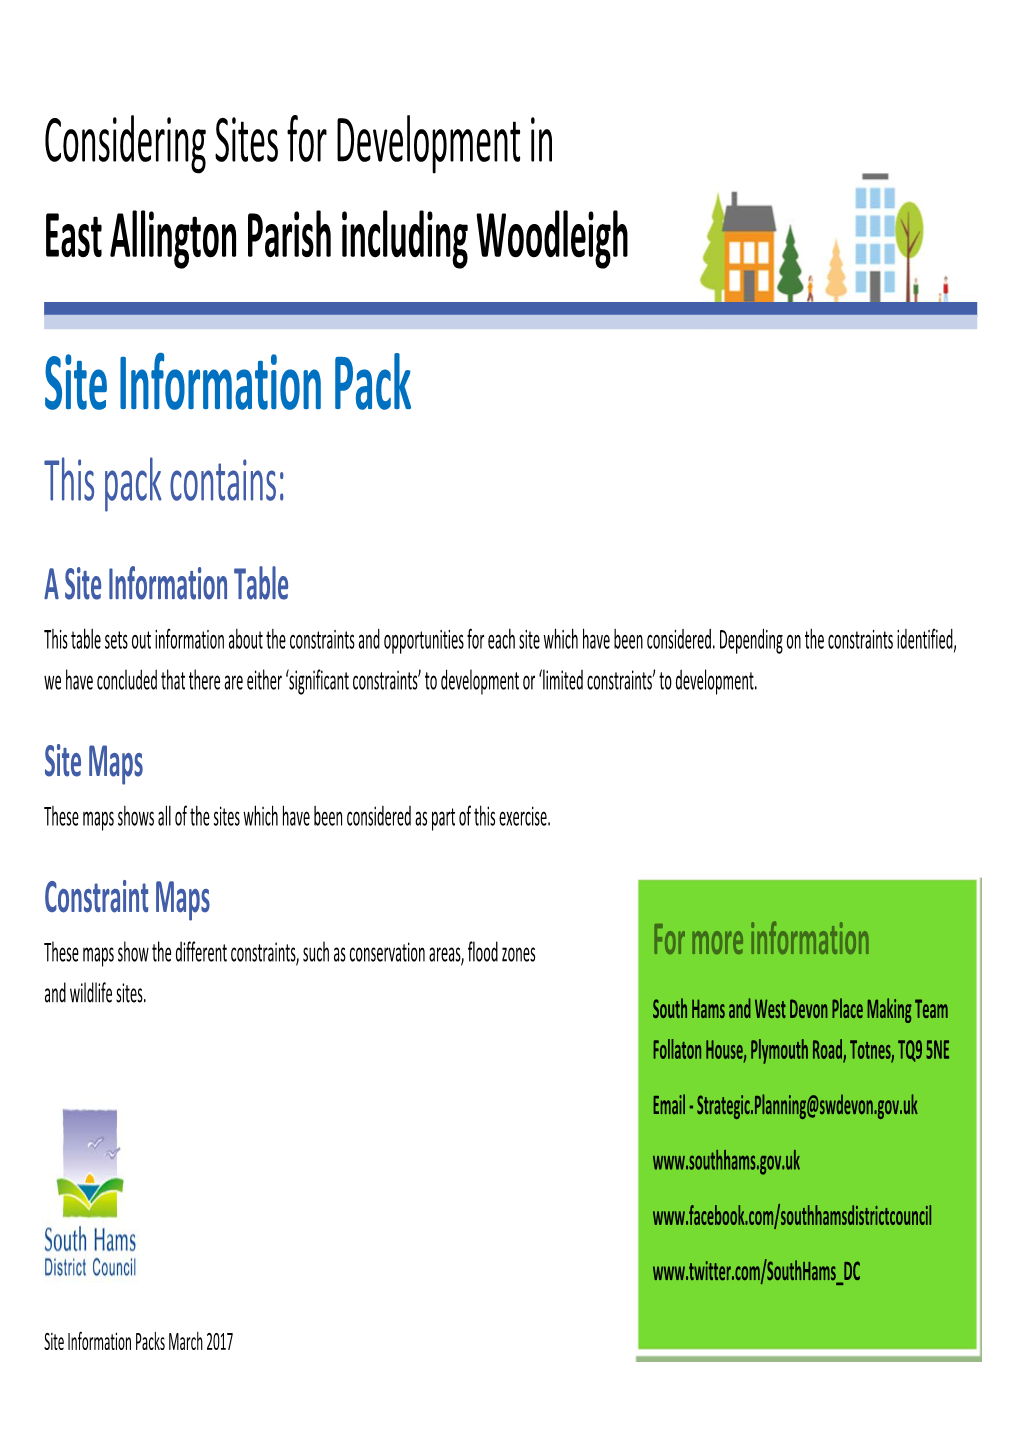 Site Information Pack